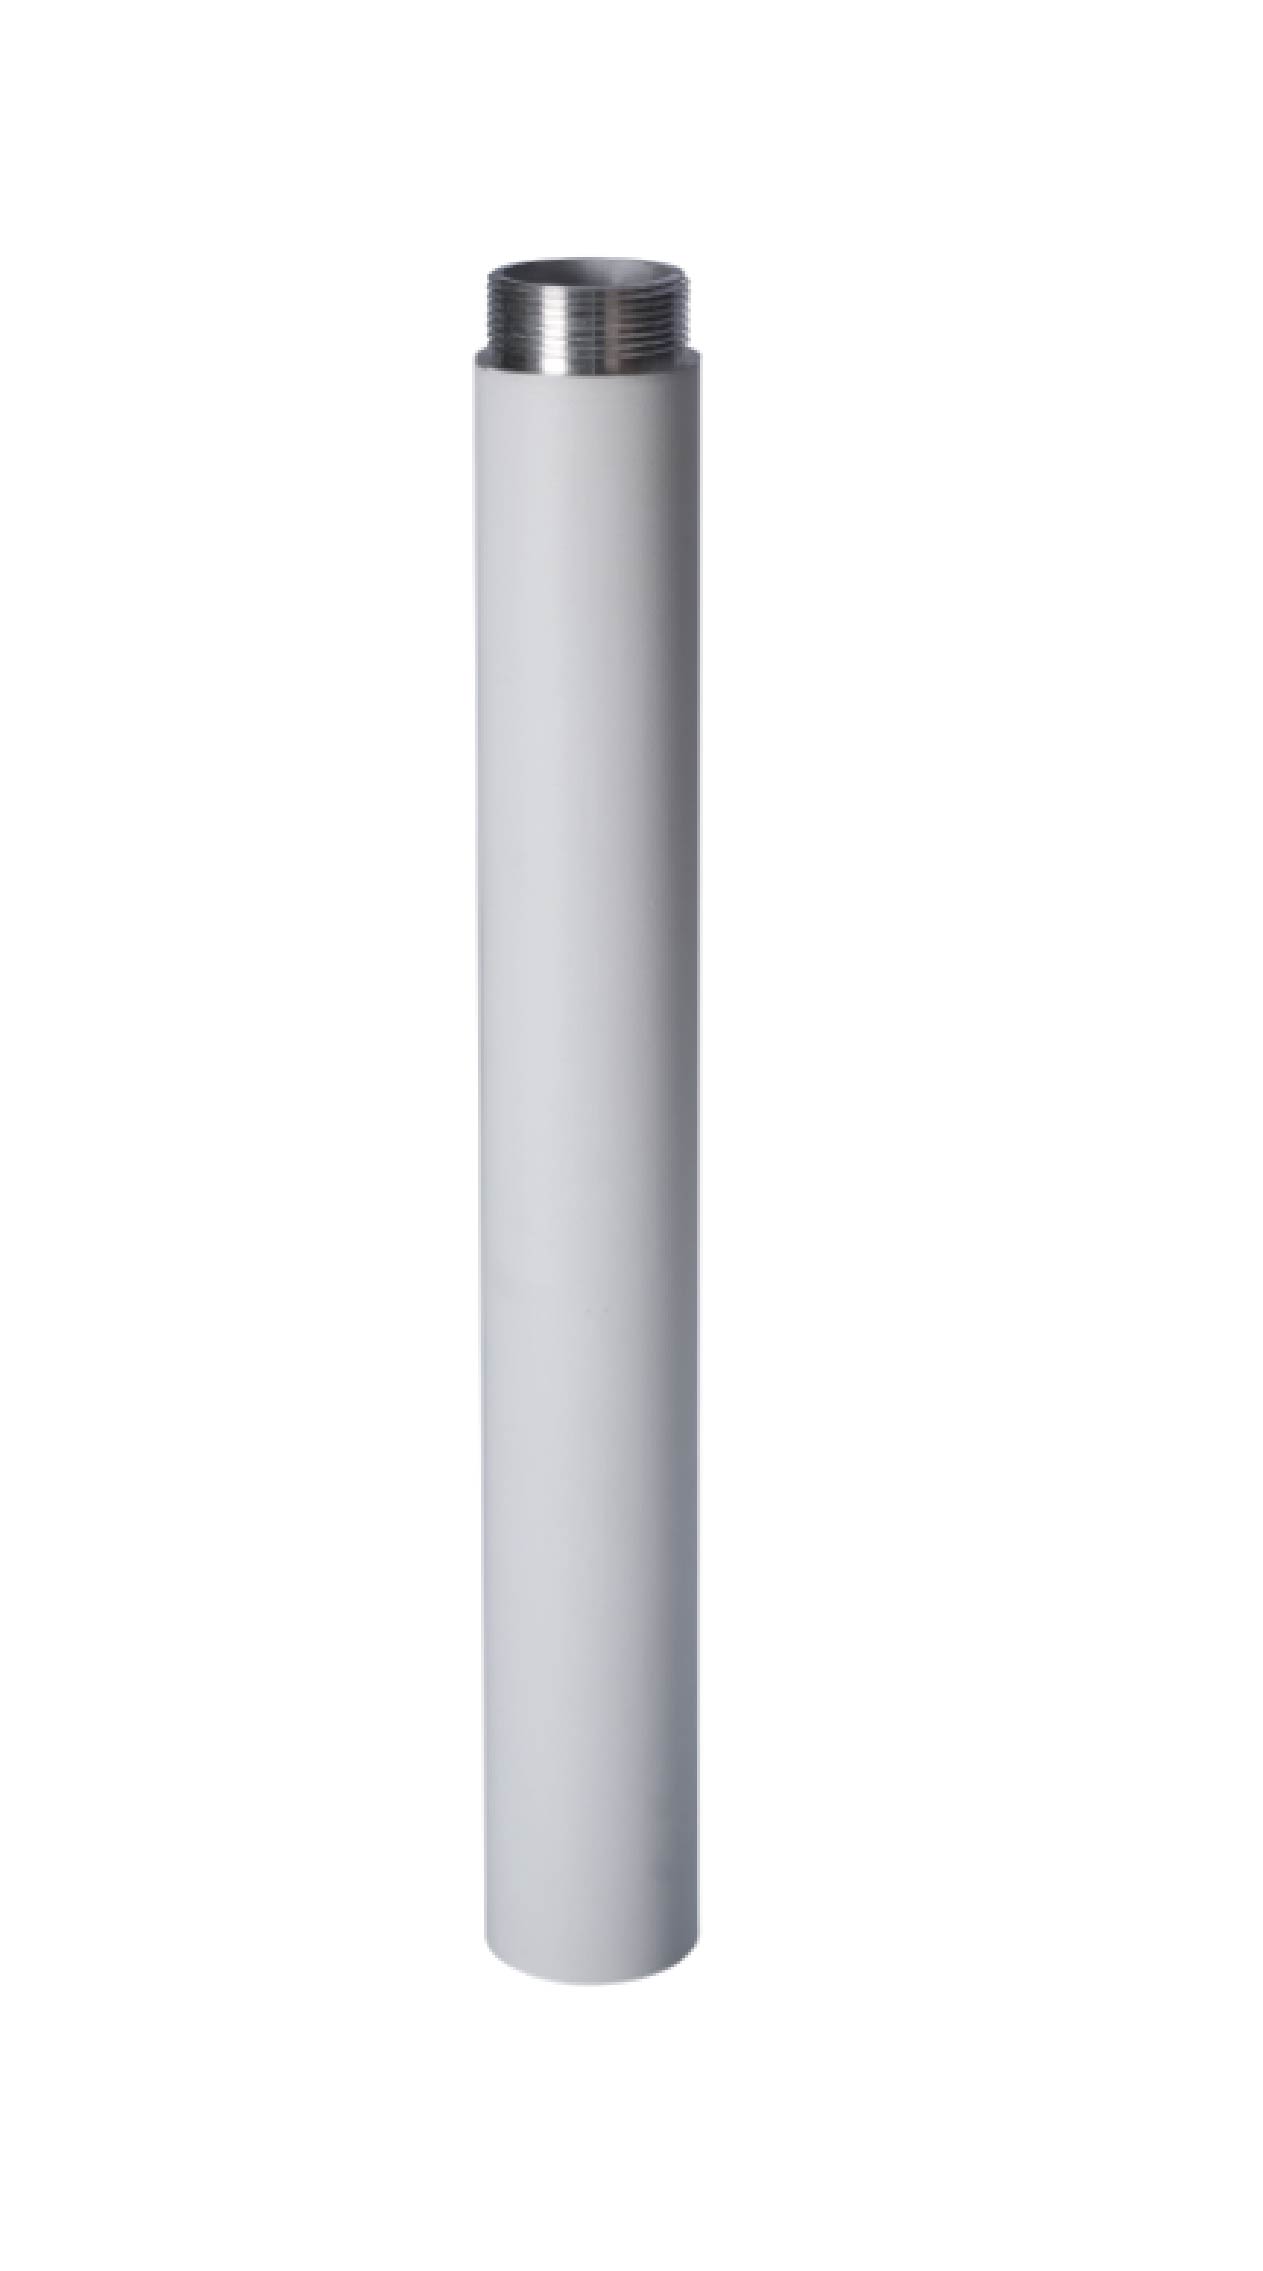 Ceiling mount 40cm (15.7 inch) extension for LE261